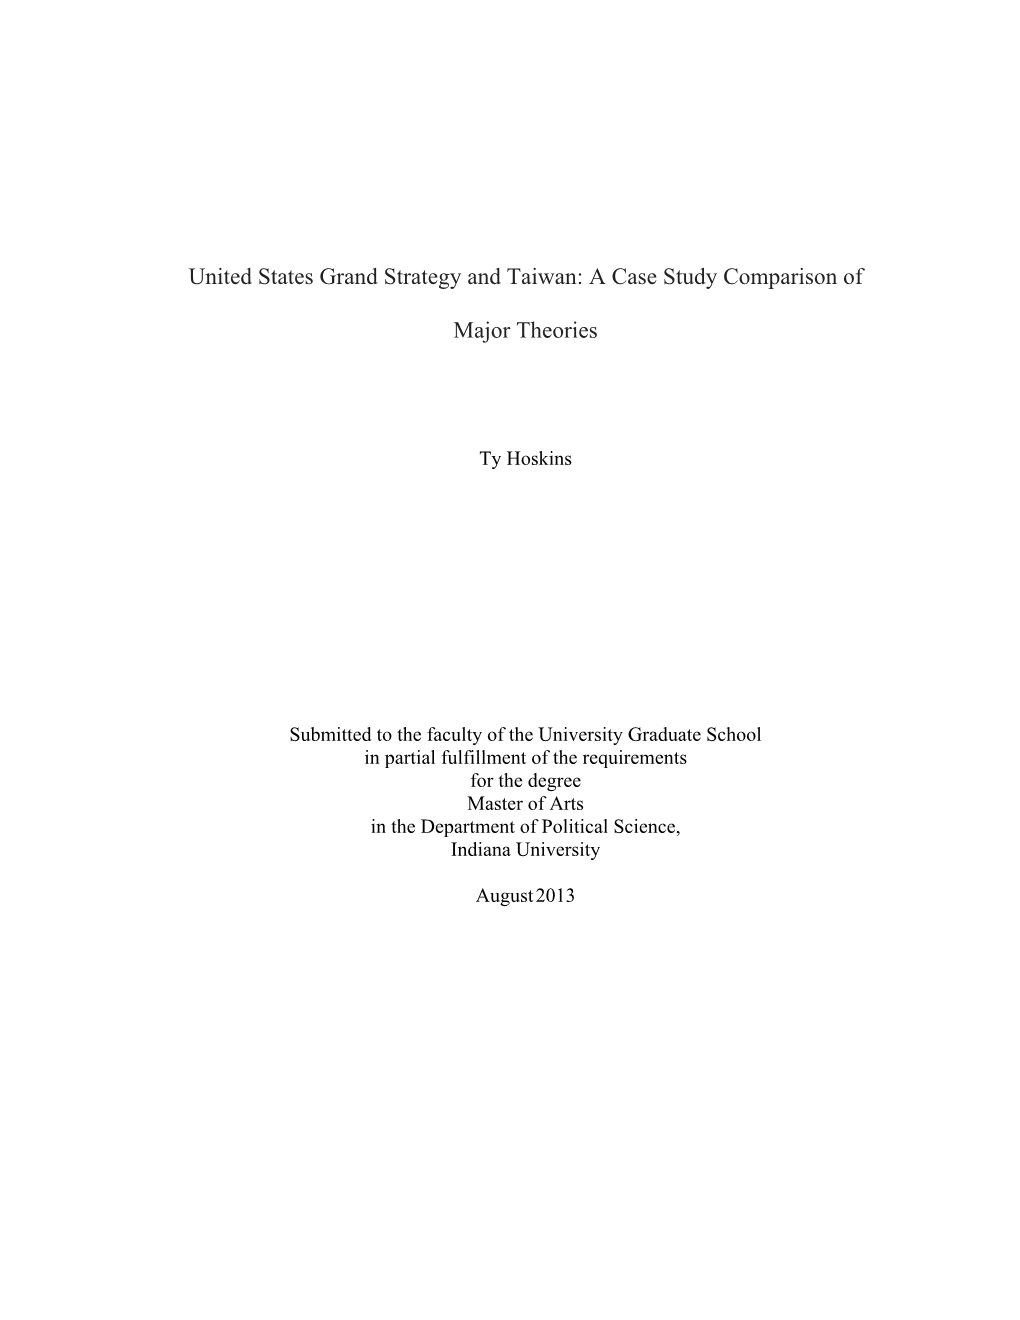 United States Grand Strategy and Taiwan: a Case Study Comparison Of